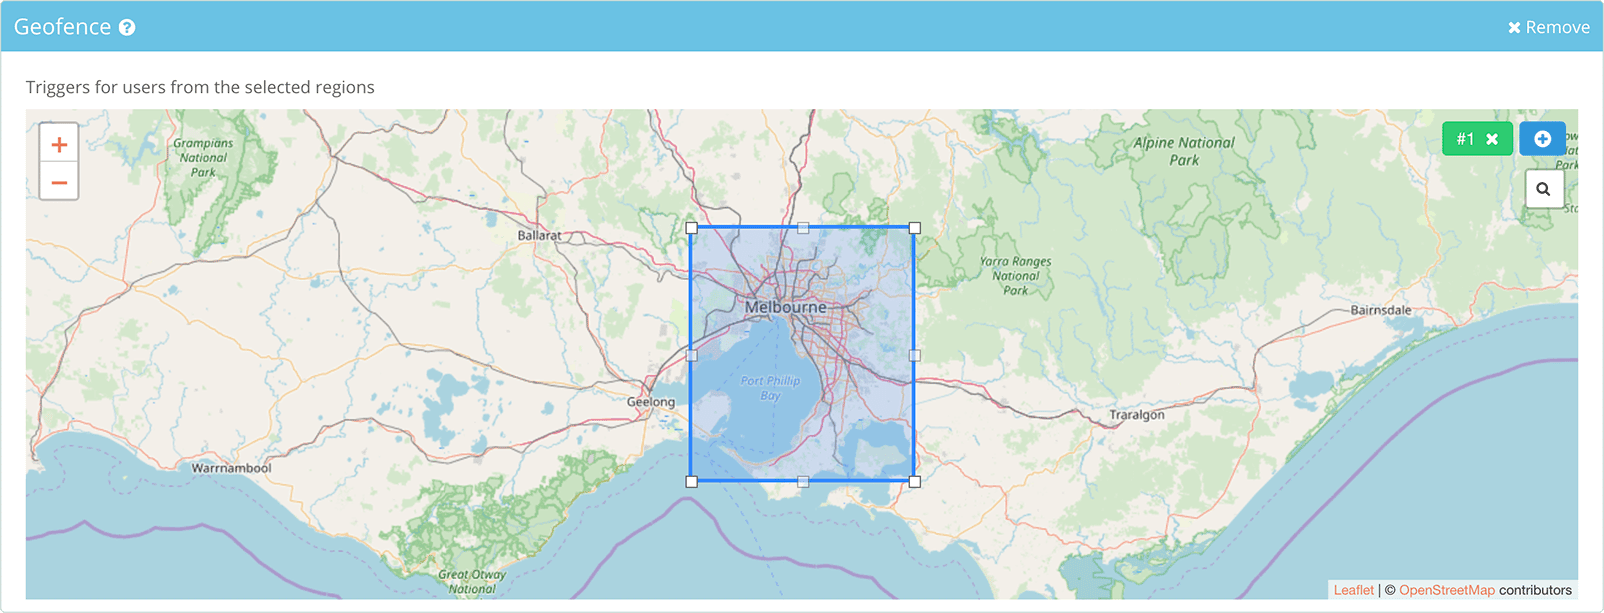 Gleam interface showing capture geofence rule